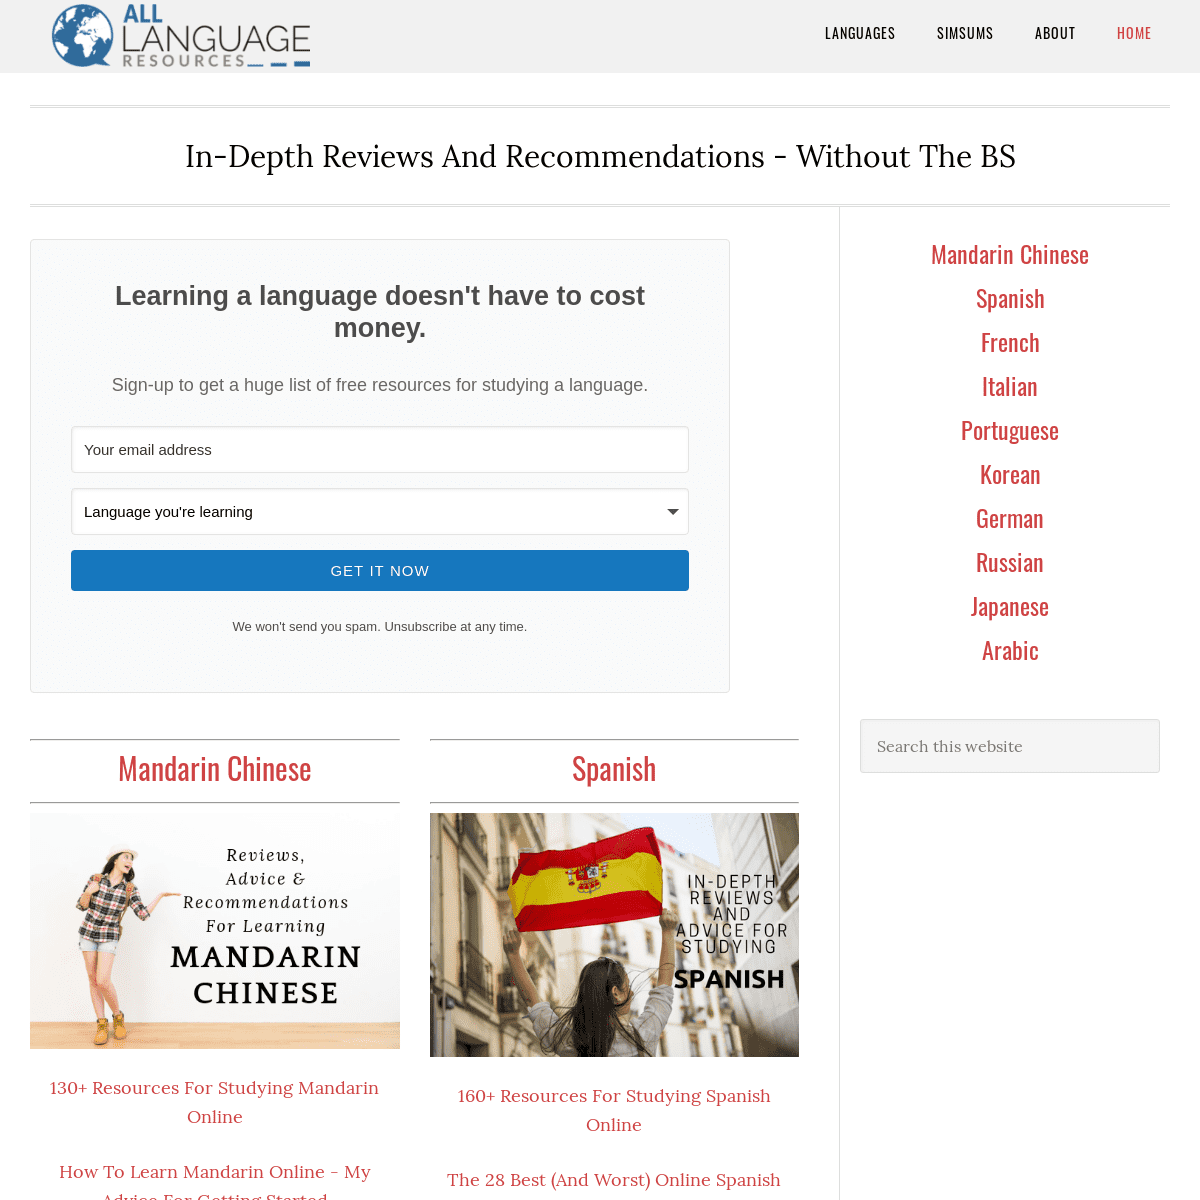 All Language Resources - Find The Best Tools For Leaning A Language